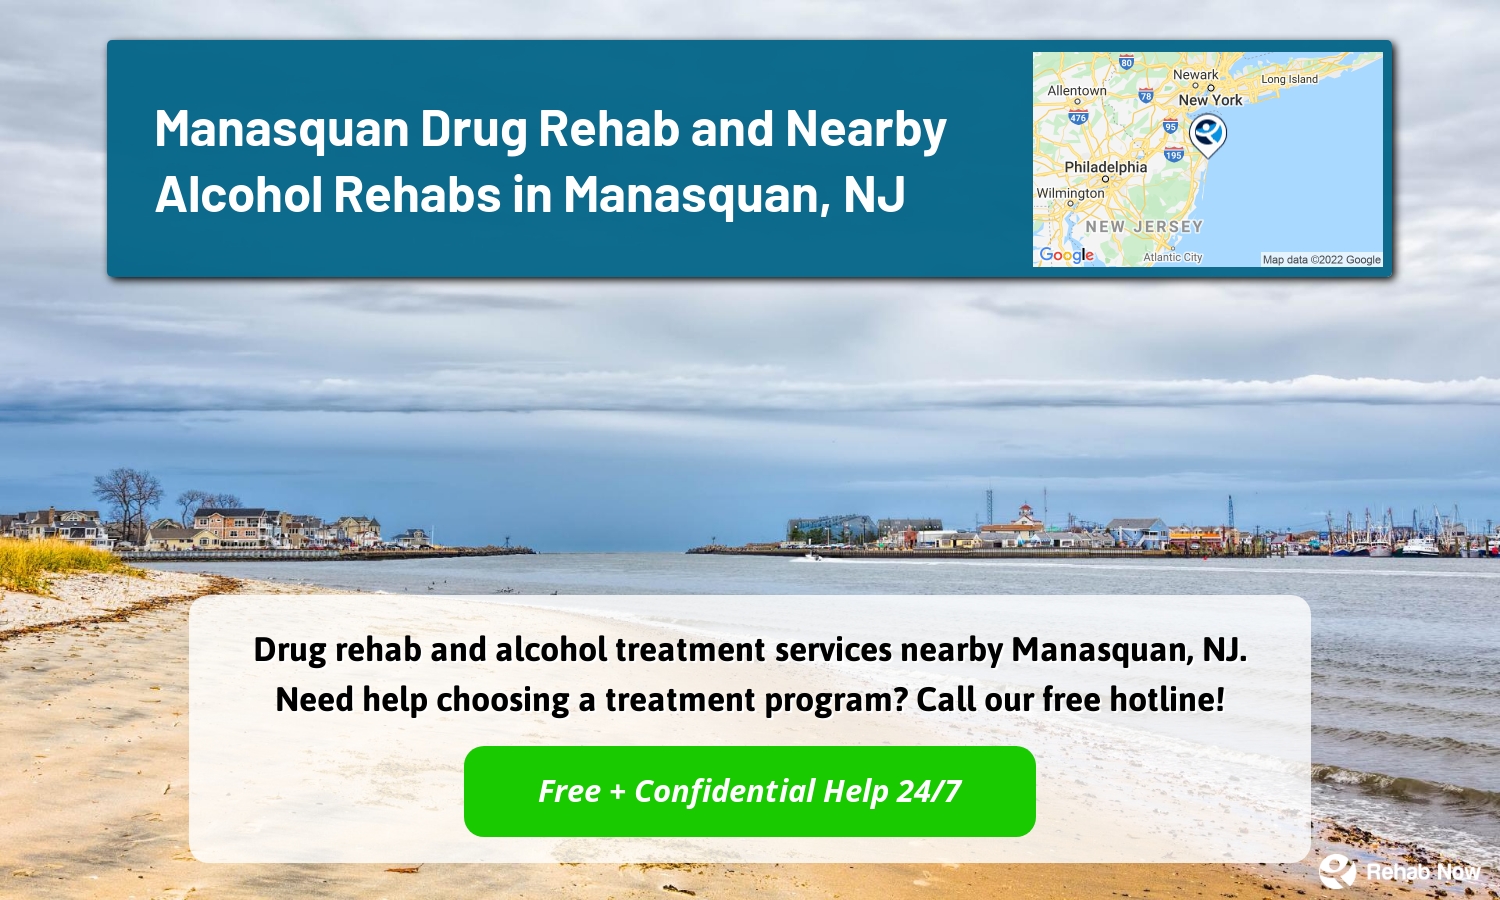 Drug rehab and alcohol treatment services nearby Manasquan, NJ. Need help choosing a treatment program? Call our free hotline!